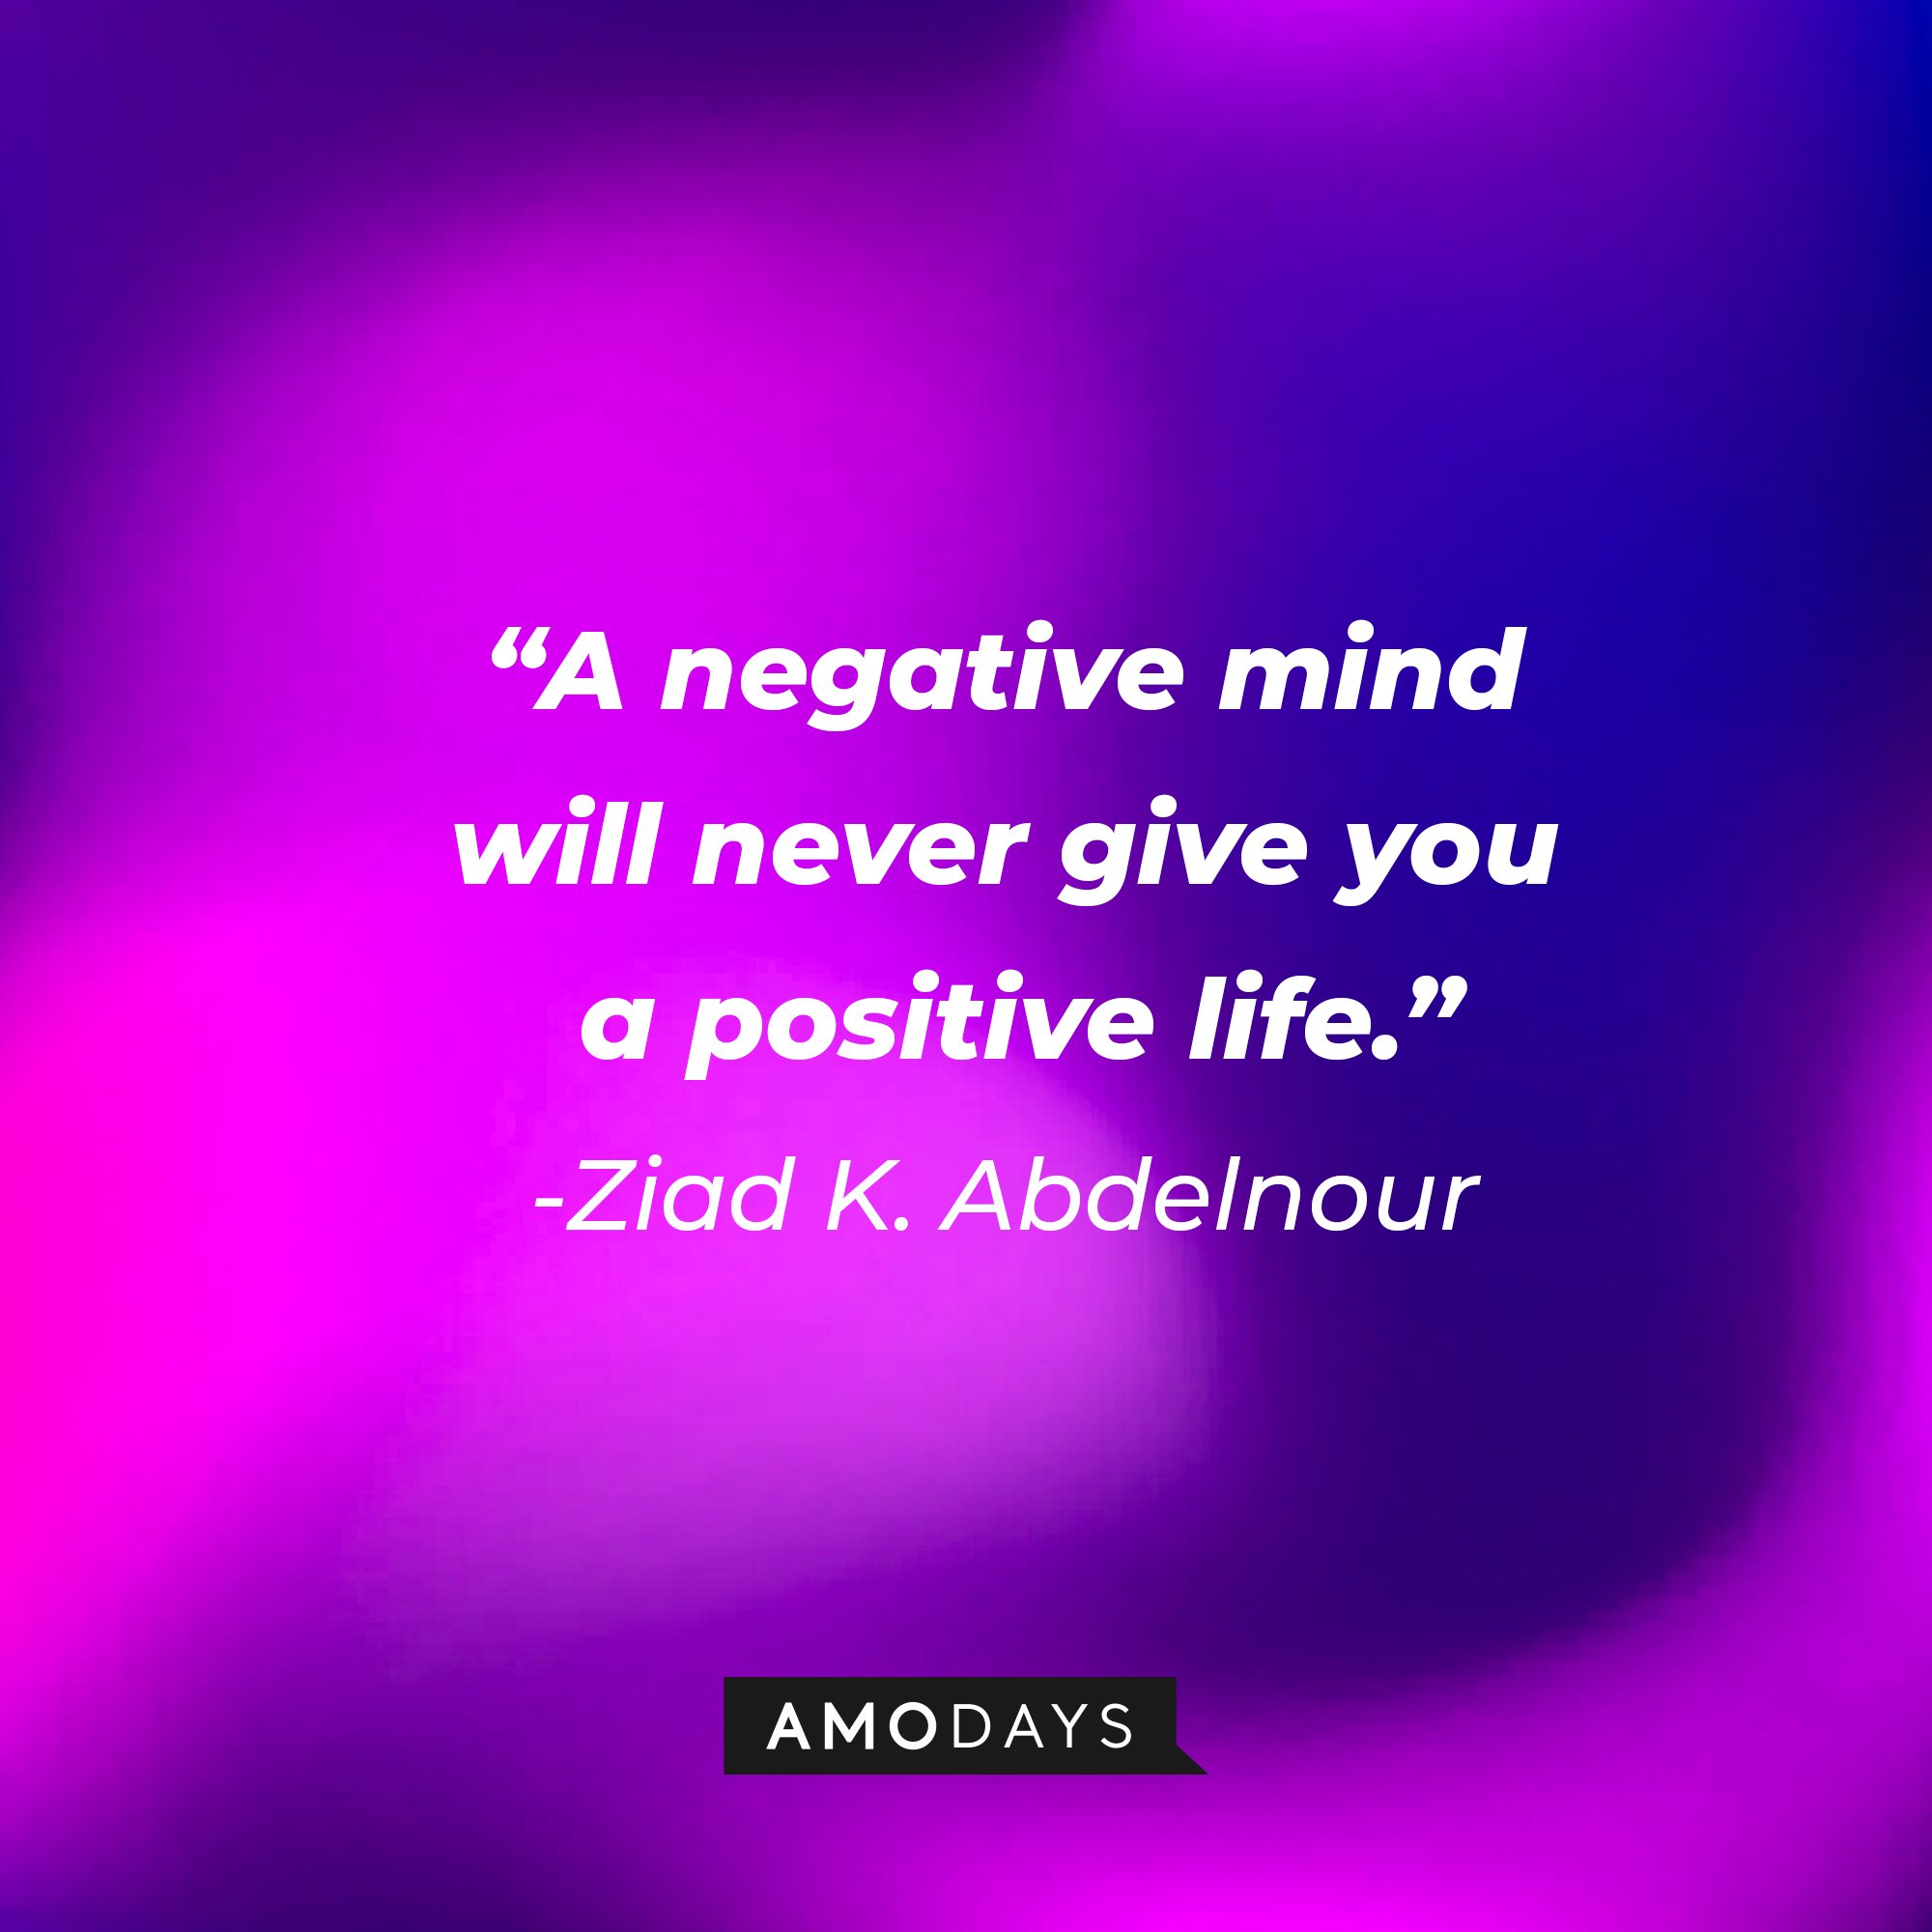 Ziad K. Abdelnour’s quote: “A negative mind will never give you a positive life.” | Image: AmoDays